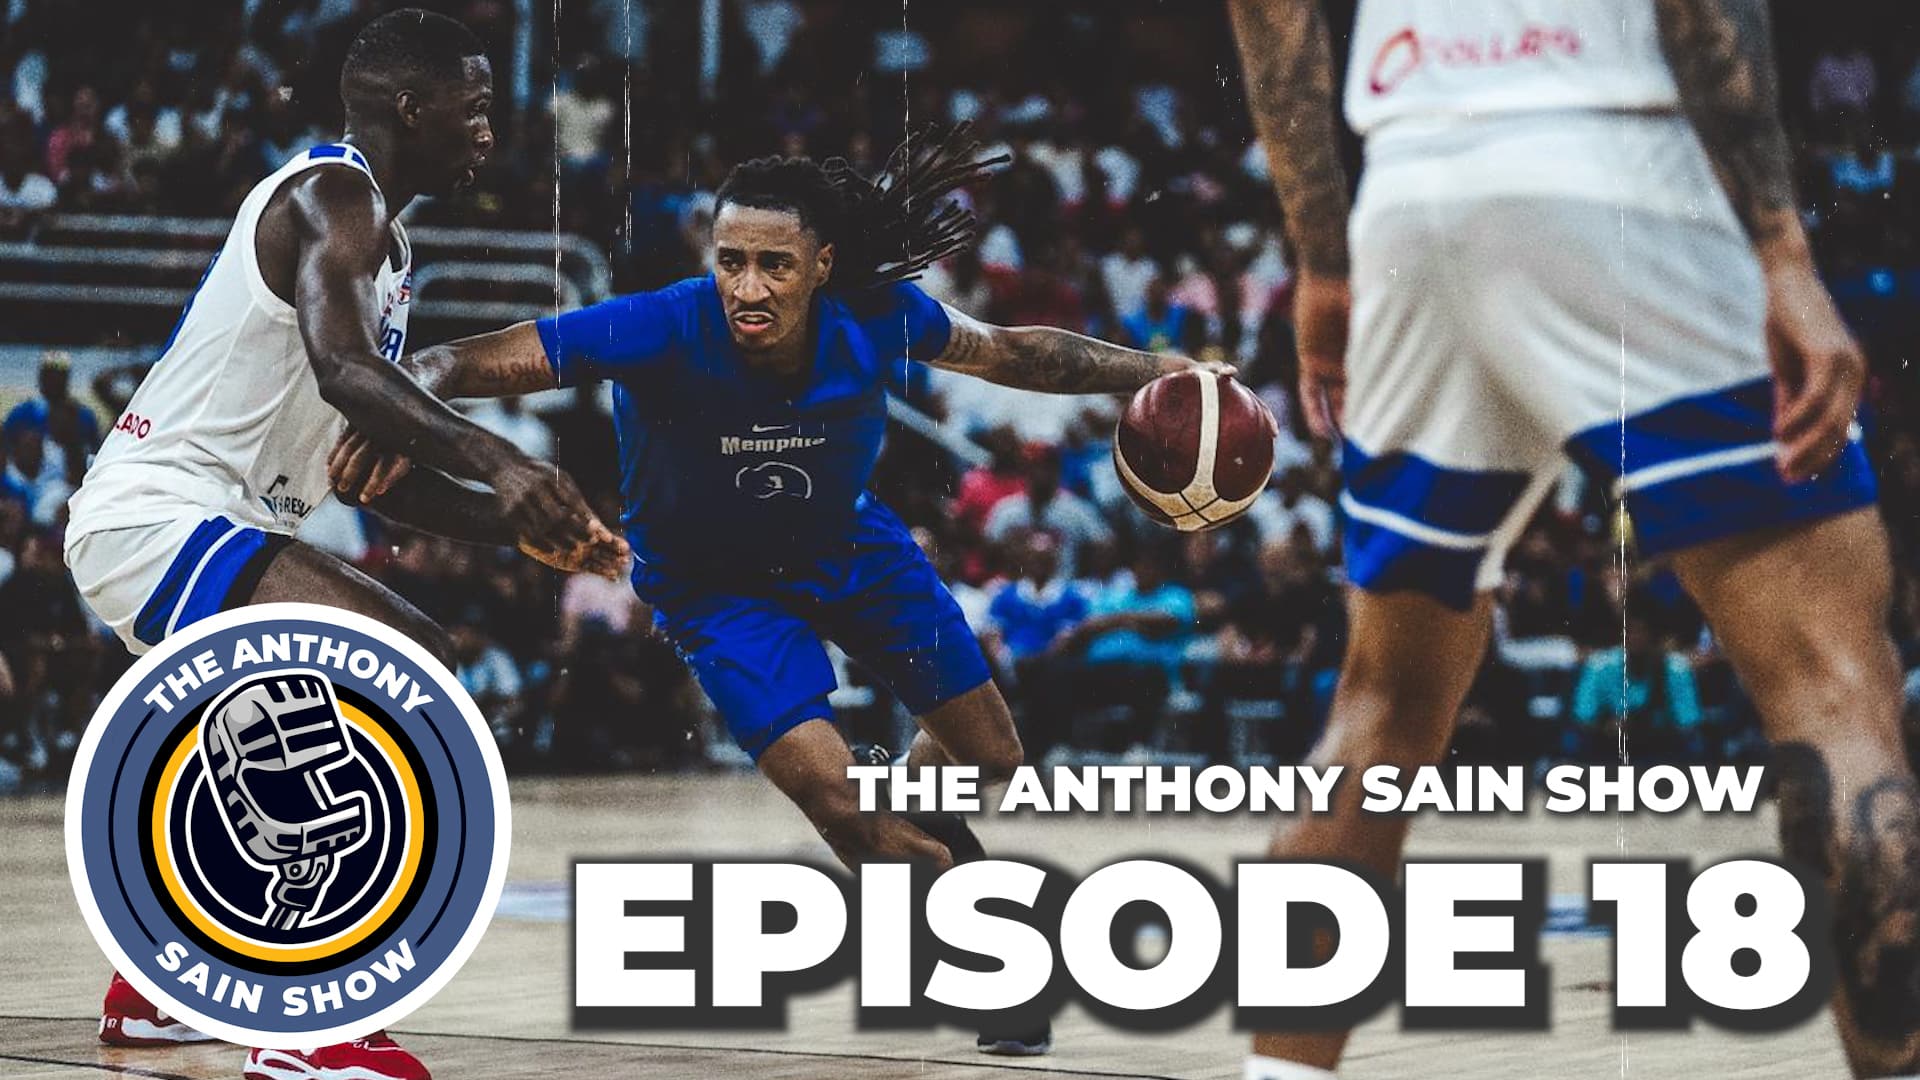 Featured image for “The Anthony Sain Show Ep 18: Unreal Atmosphere in the DR, Desmond Bane An All-Star in 2023”